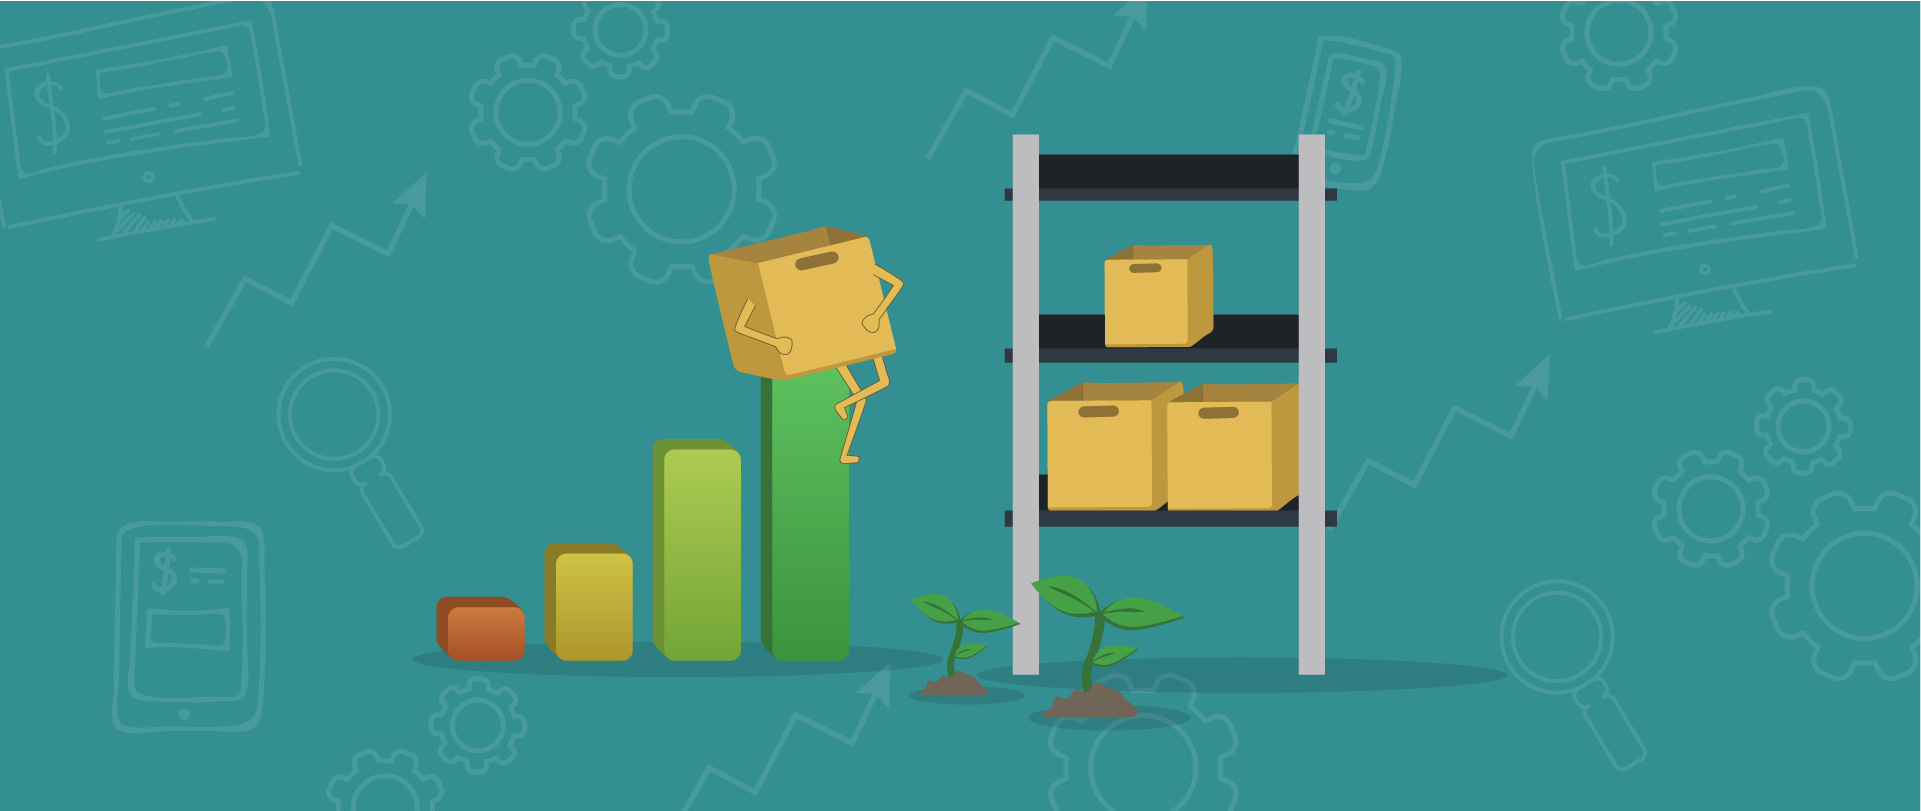 Bob the Box sits proudly on an increasing bar graph that shows the benefits of outsourcing order fulfillment.